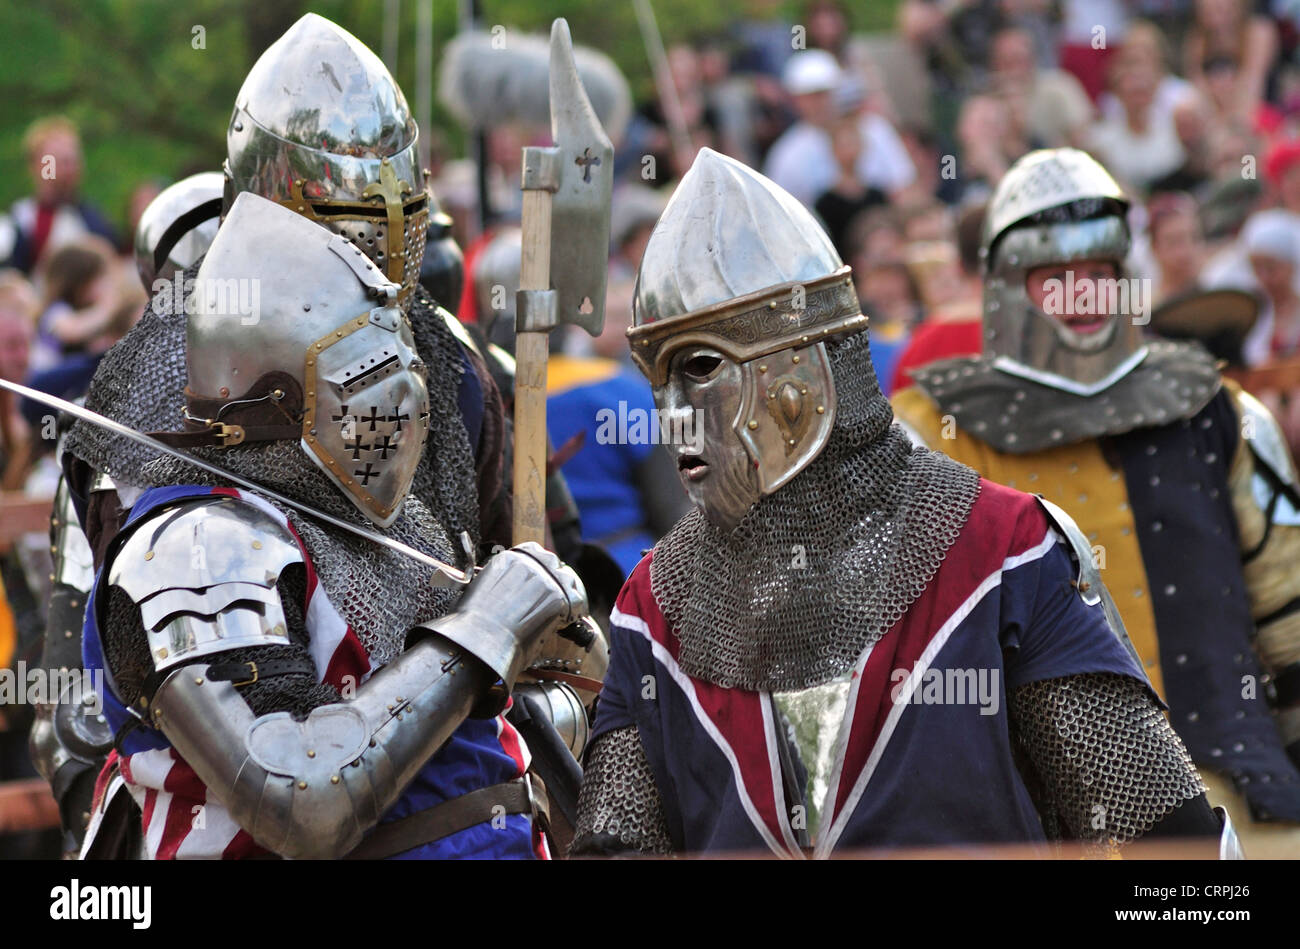 Medieval knights. Stock Photo